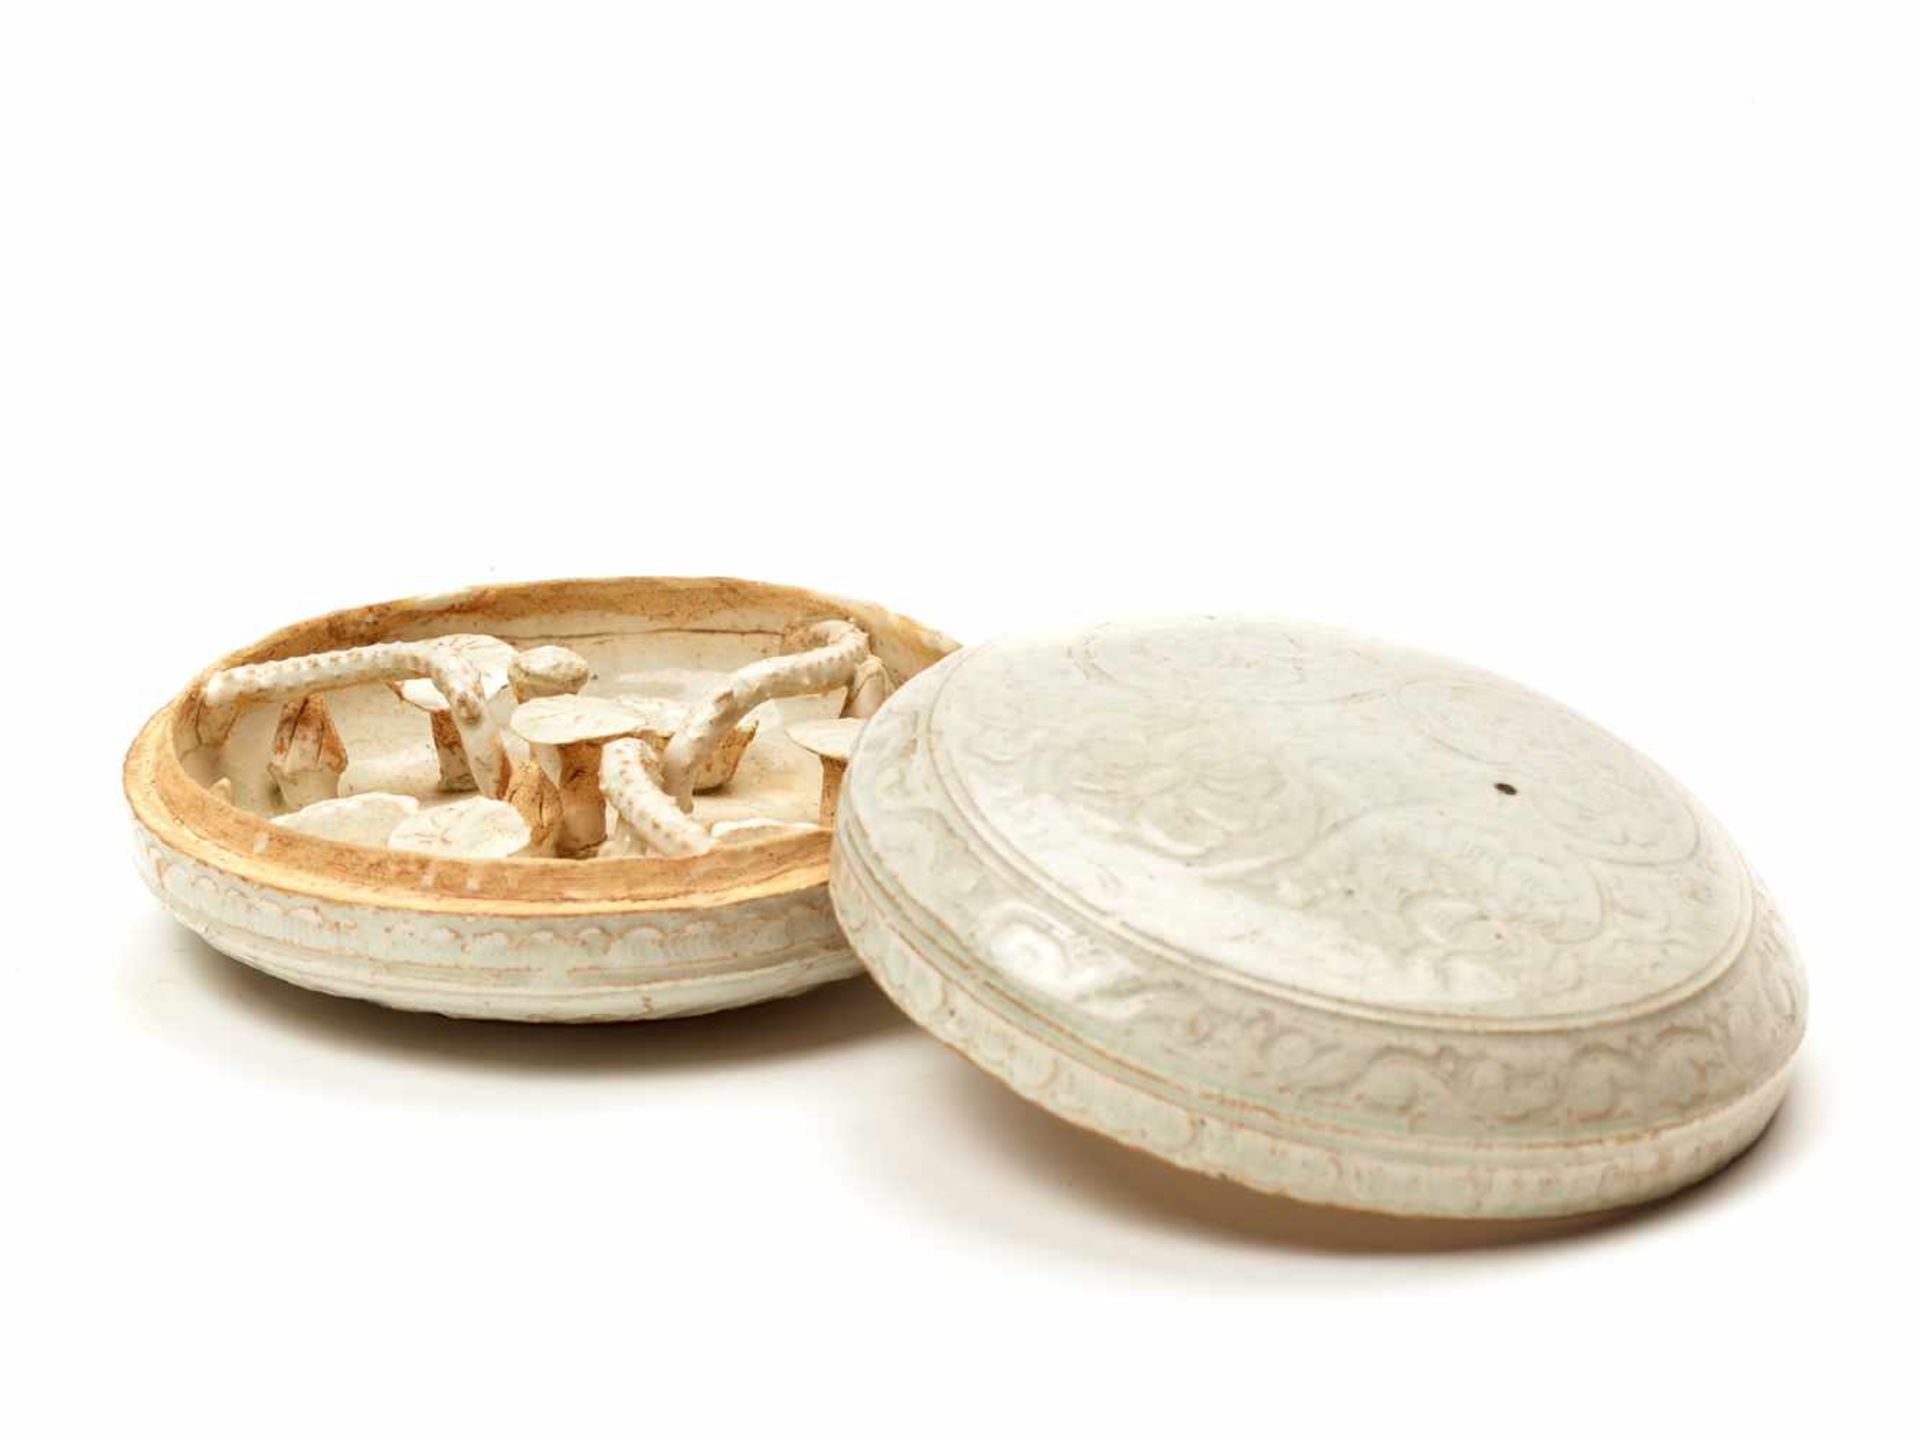 A QINGBAI MOLDED CERAMIC BOX AND COVER, SONG TO MING DYNASTY - Image 2 of 5